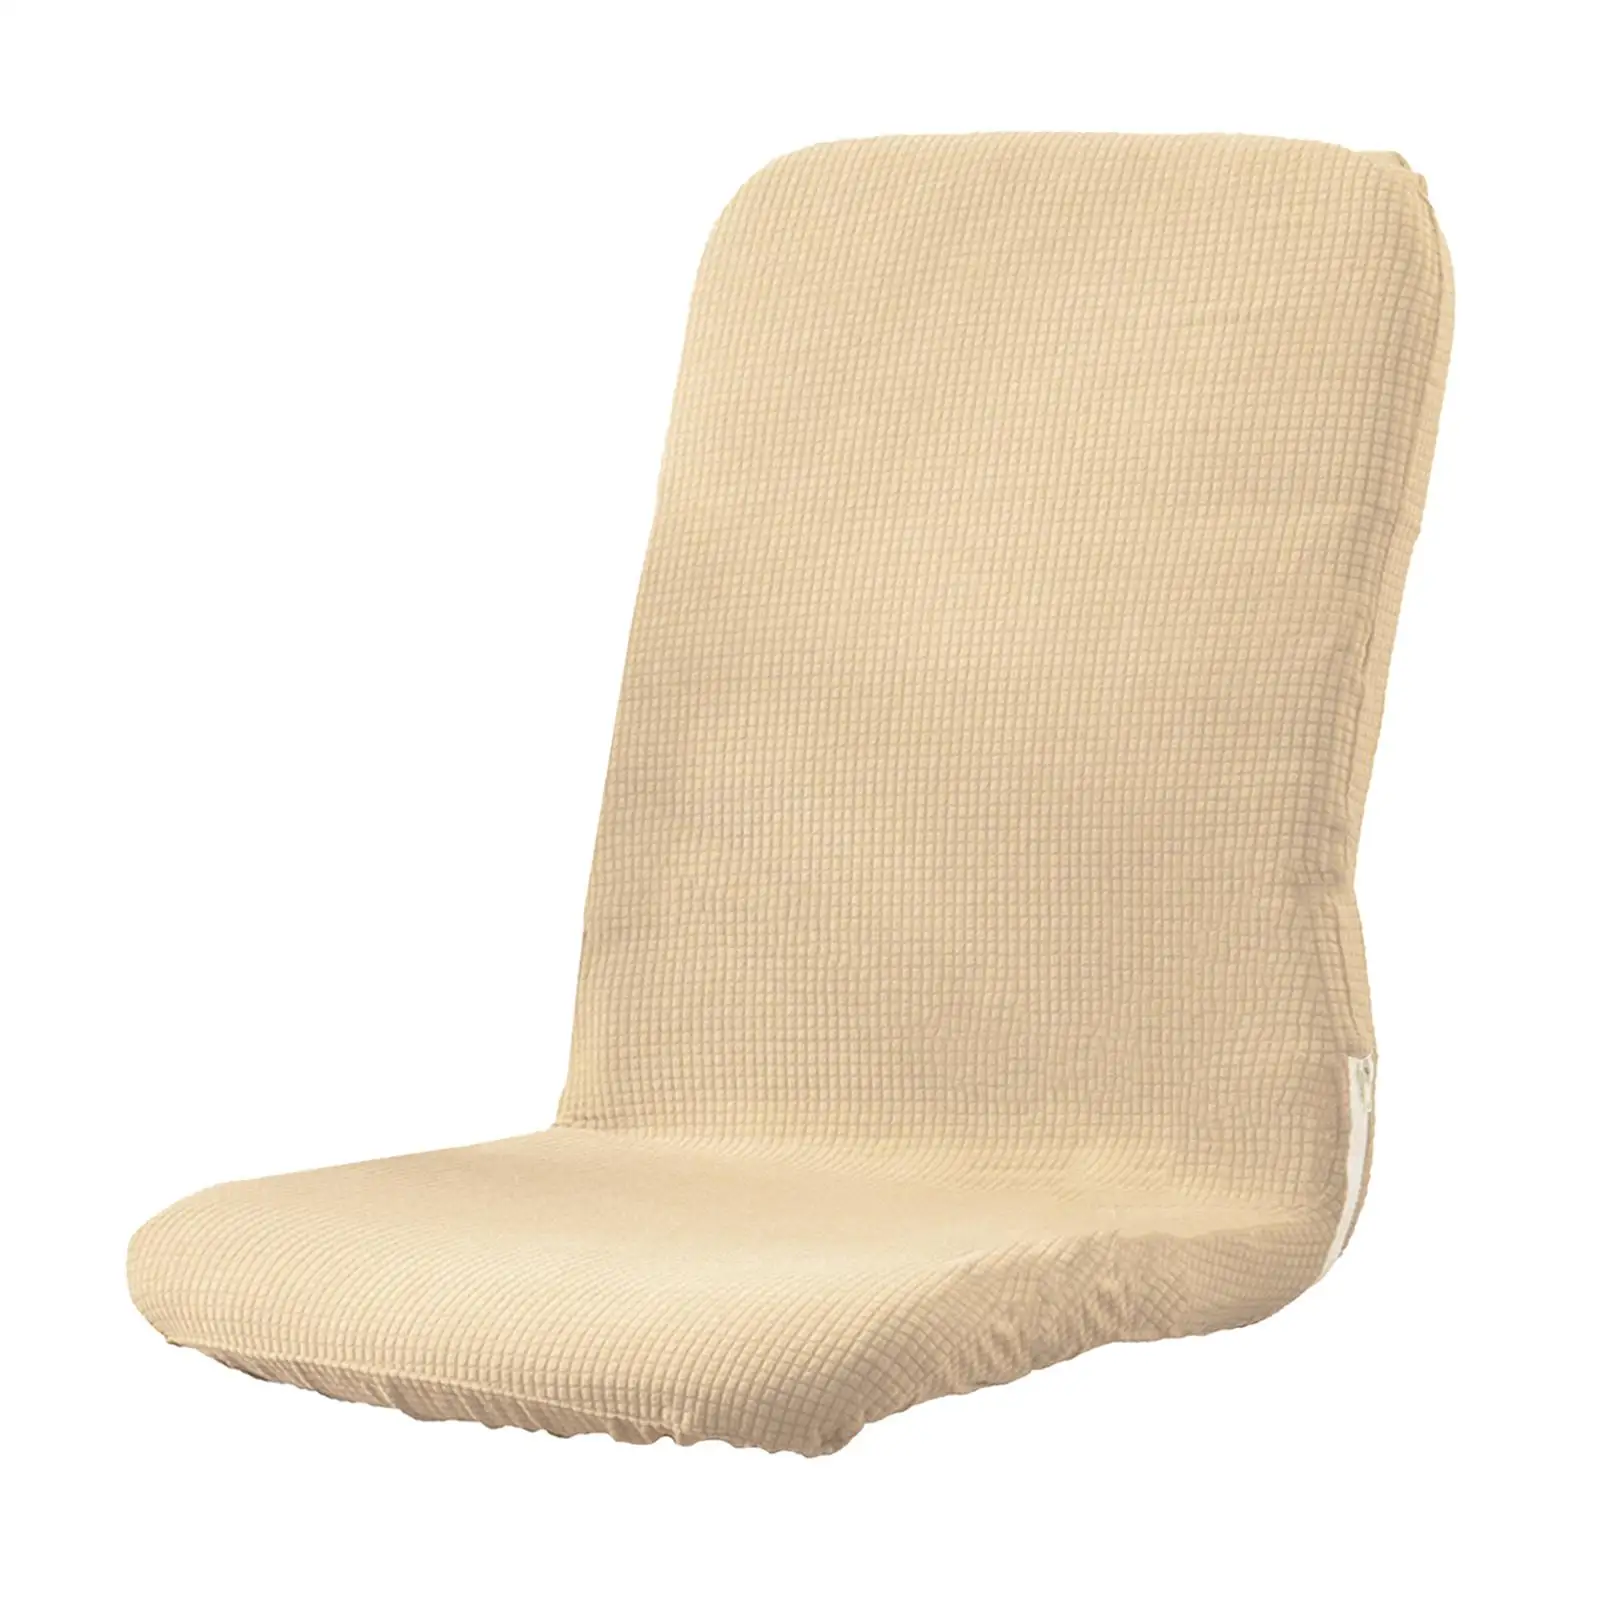 Office Chair Covers Armchair Slipcover Boss Chair Slipcovers for Home Office Chairs Decor